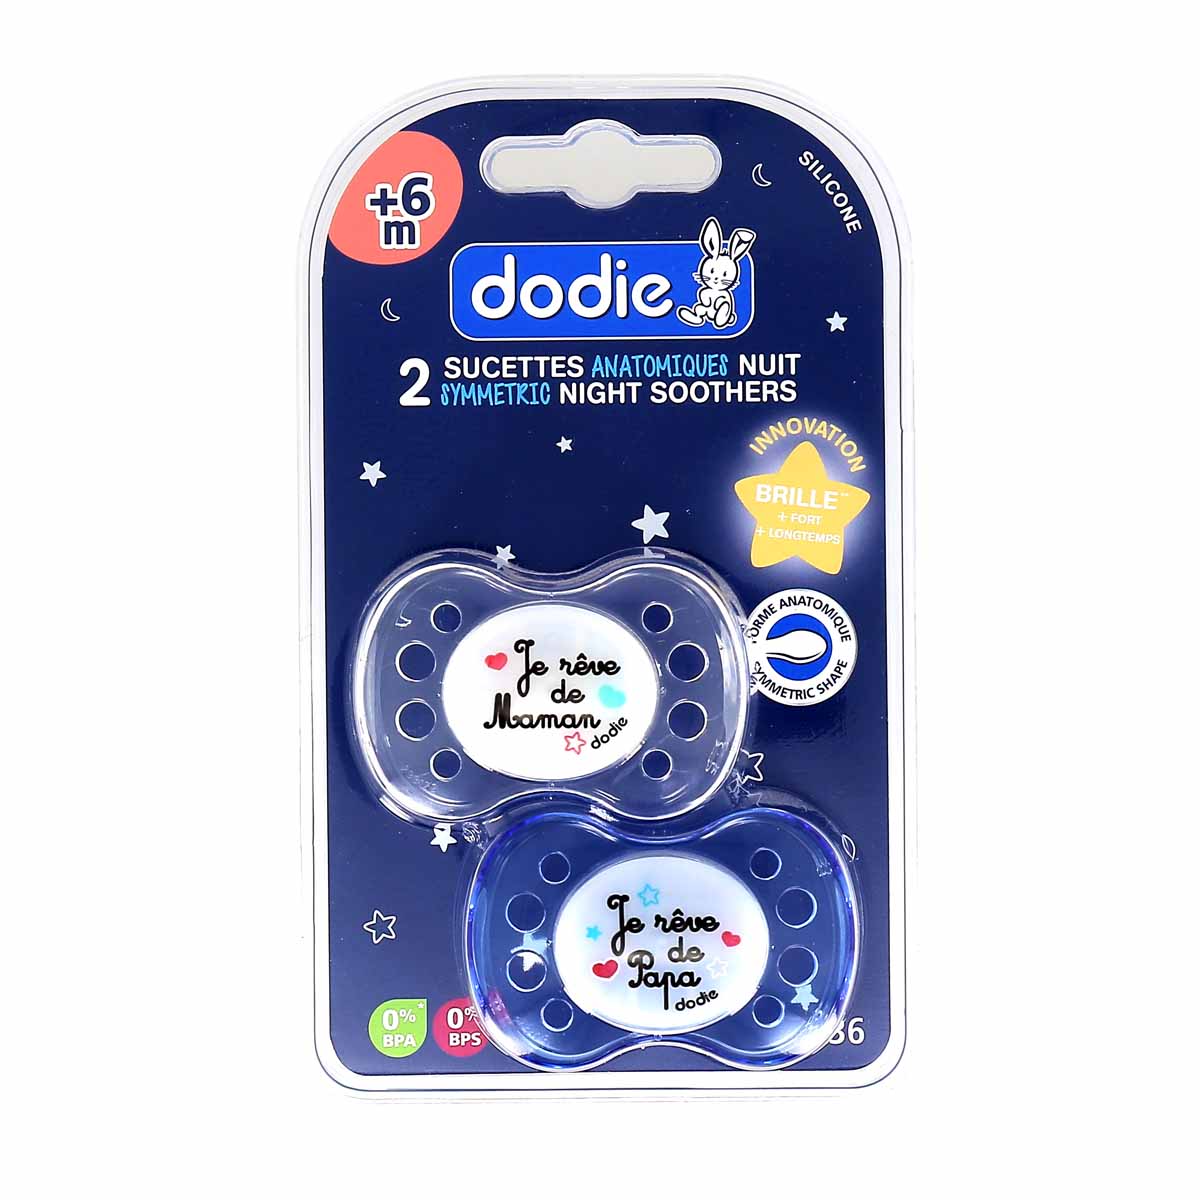 Dodie sucette silicone +6 mois nuit 2 sucettes | Pharmacie Saint Bruno